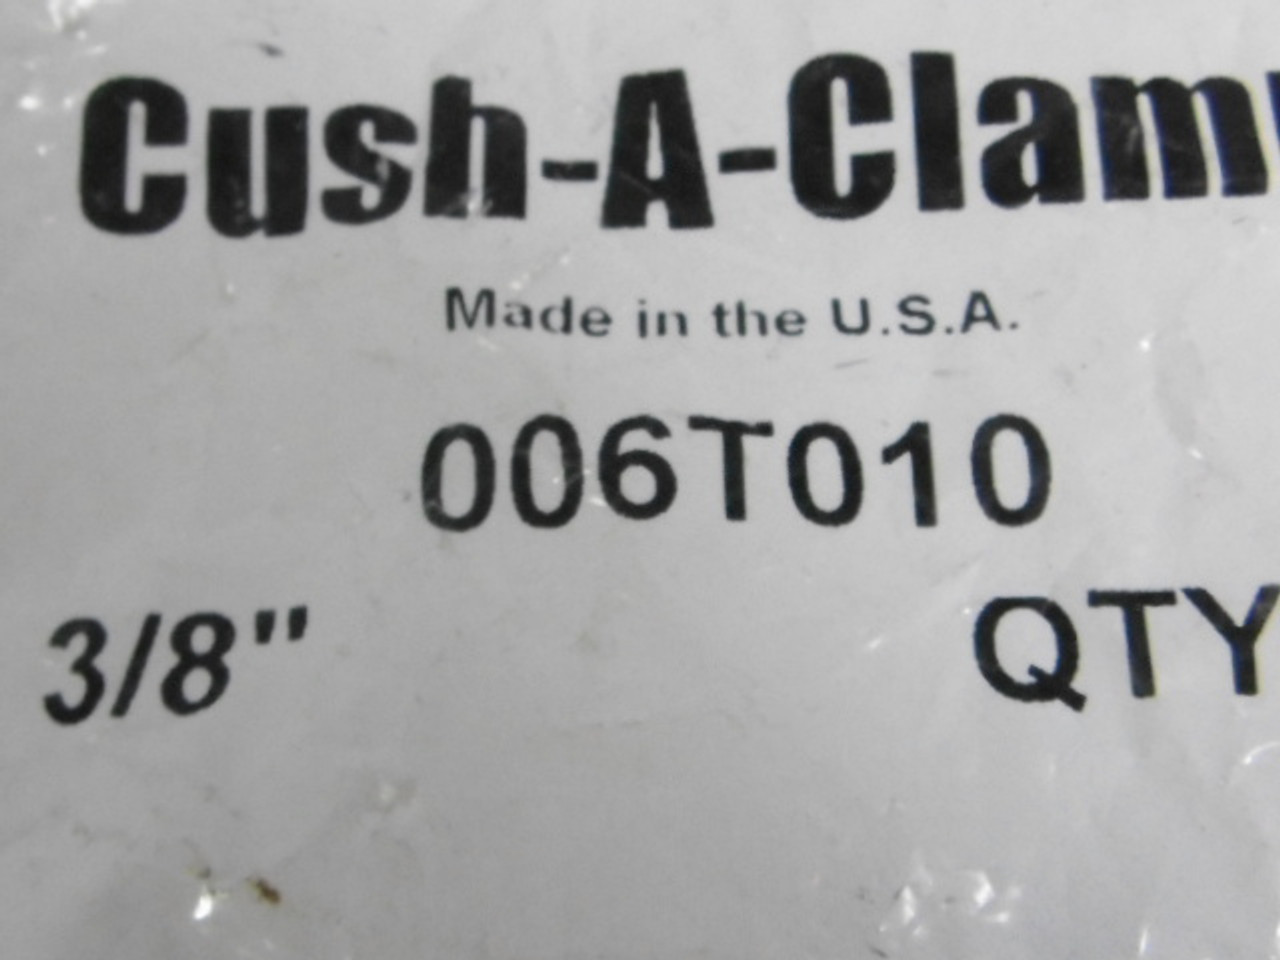 Cush-A-Clamp 006T010 Clamp Assembly Kit 3/8" NWB